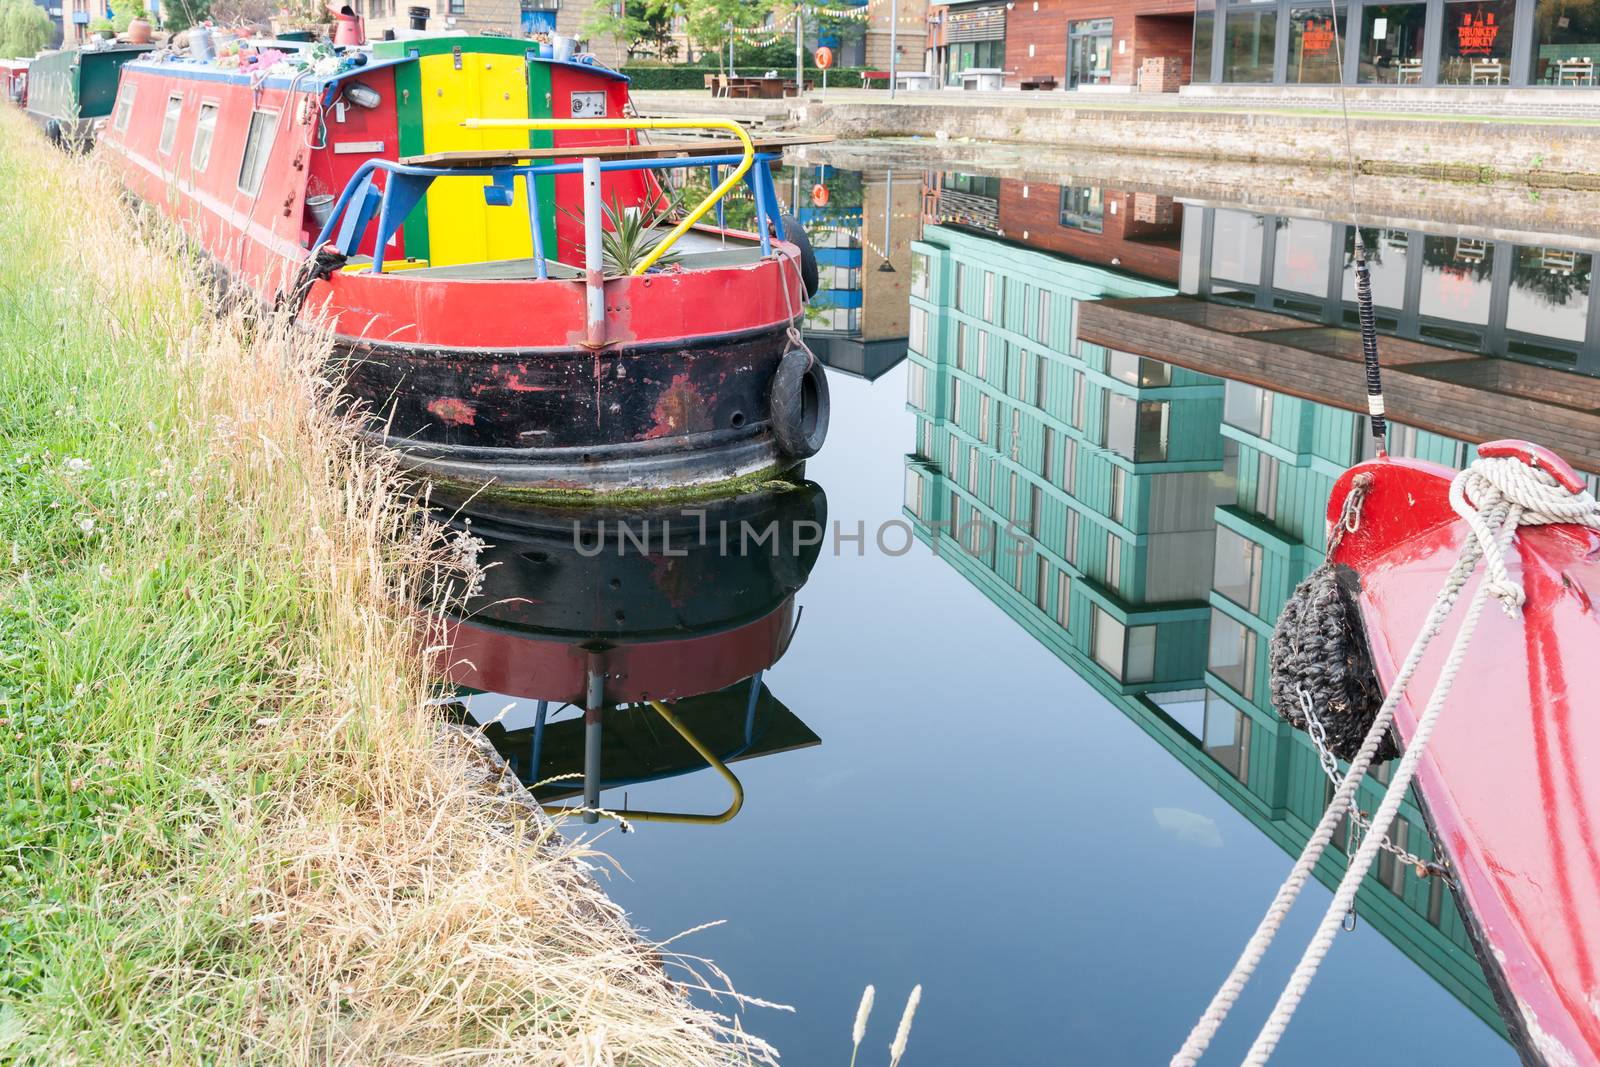 Bright primary colors canal boat, house boat, in London England